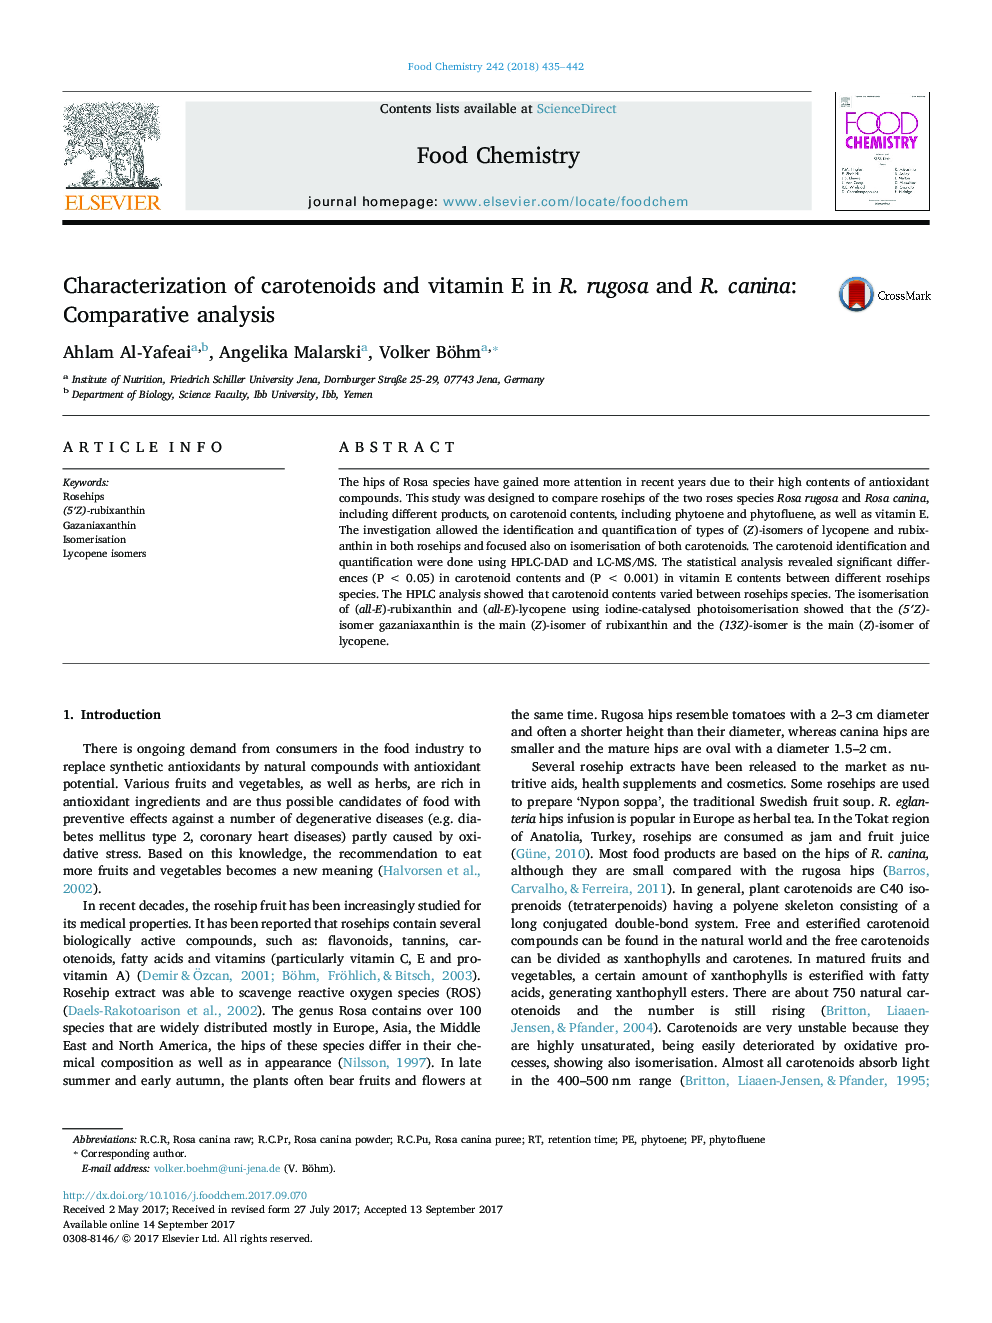 Characterization of carotenoids and vitamin E in R. rugosa and R. canina: Comparative analysis